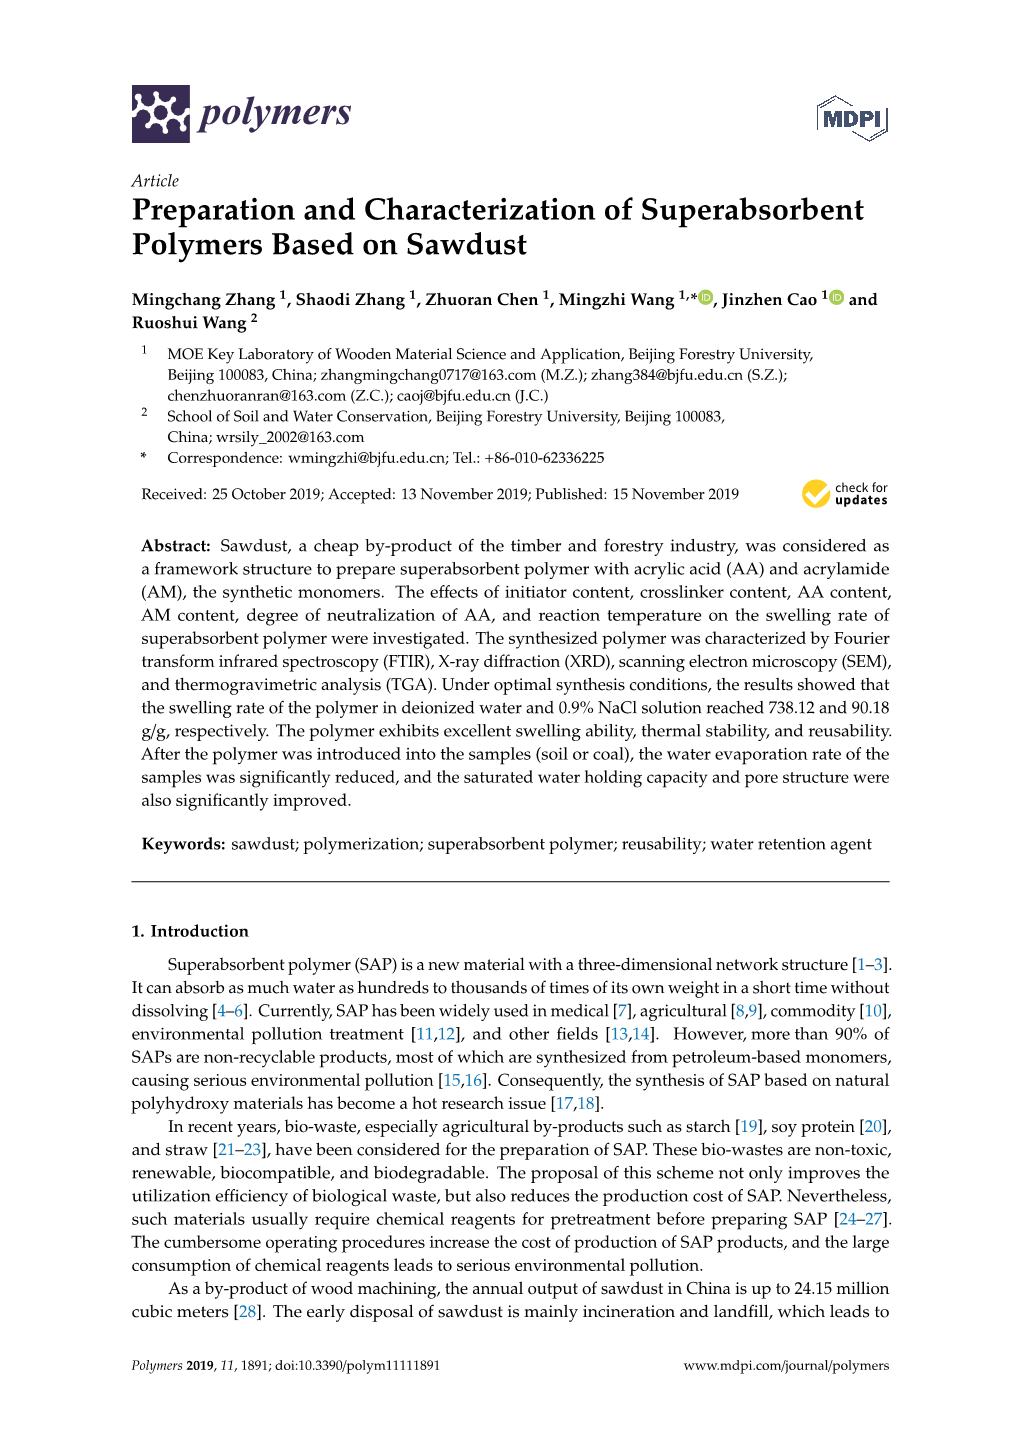 Preparation and Characterization of Superabsorbent Polymers Based on Sawdust